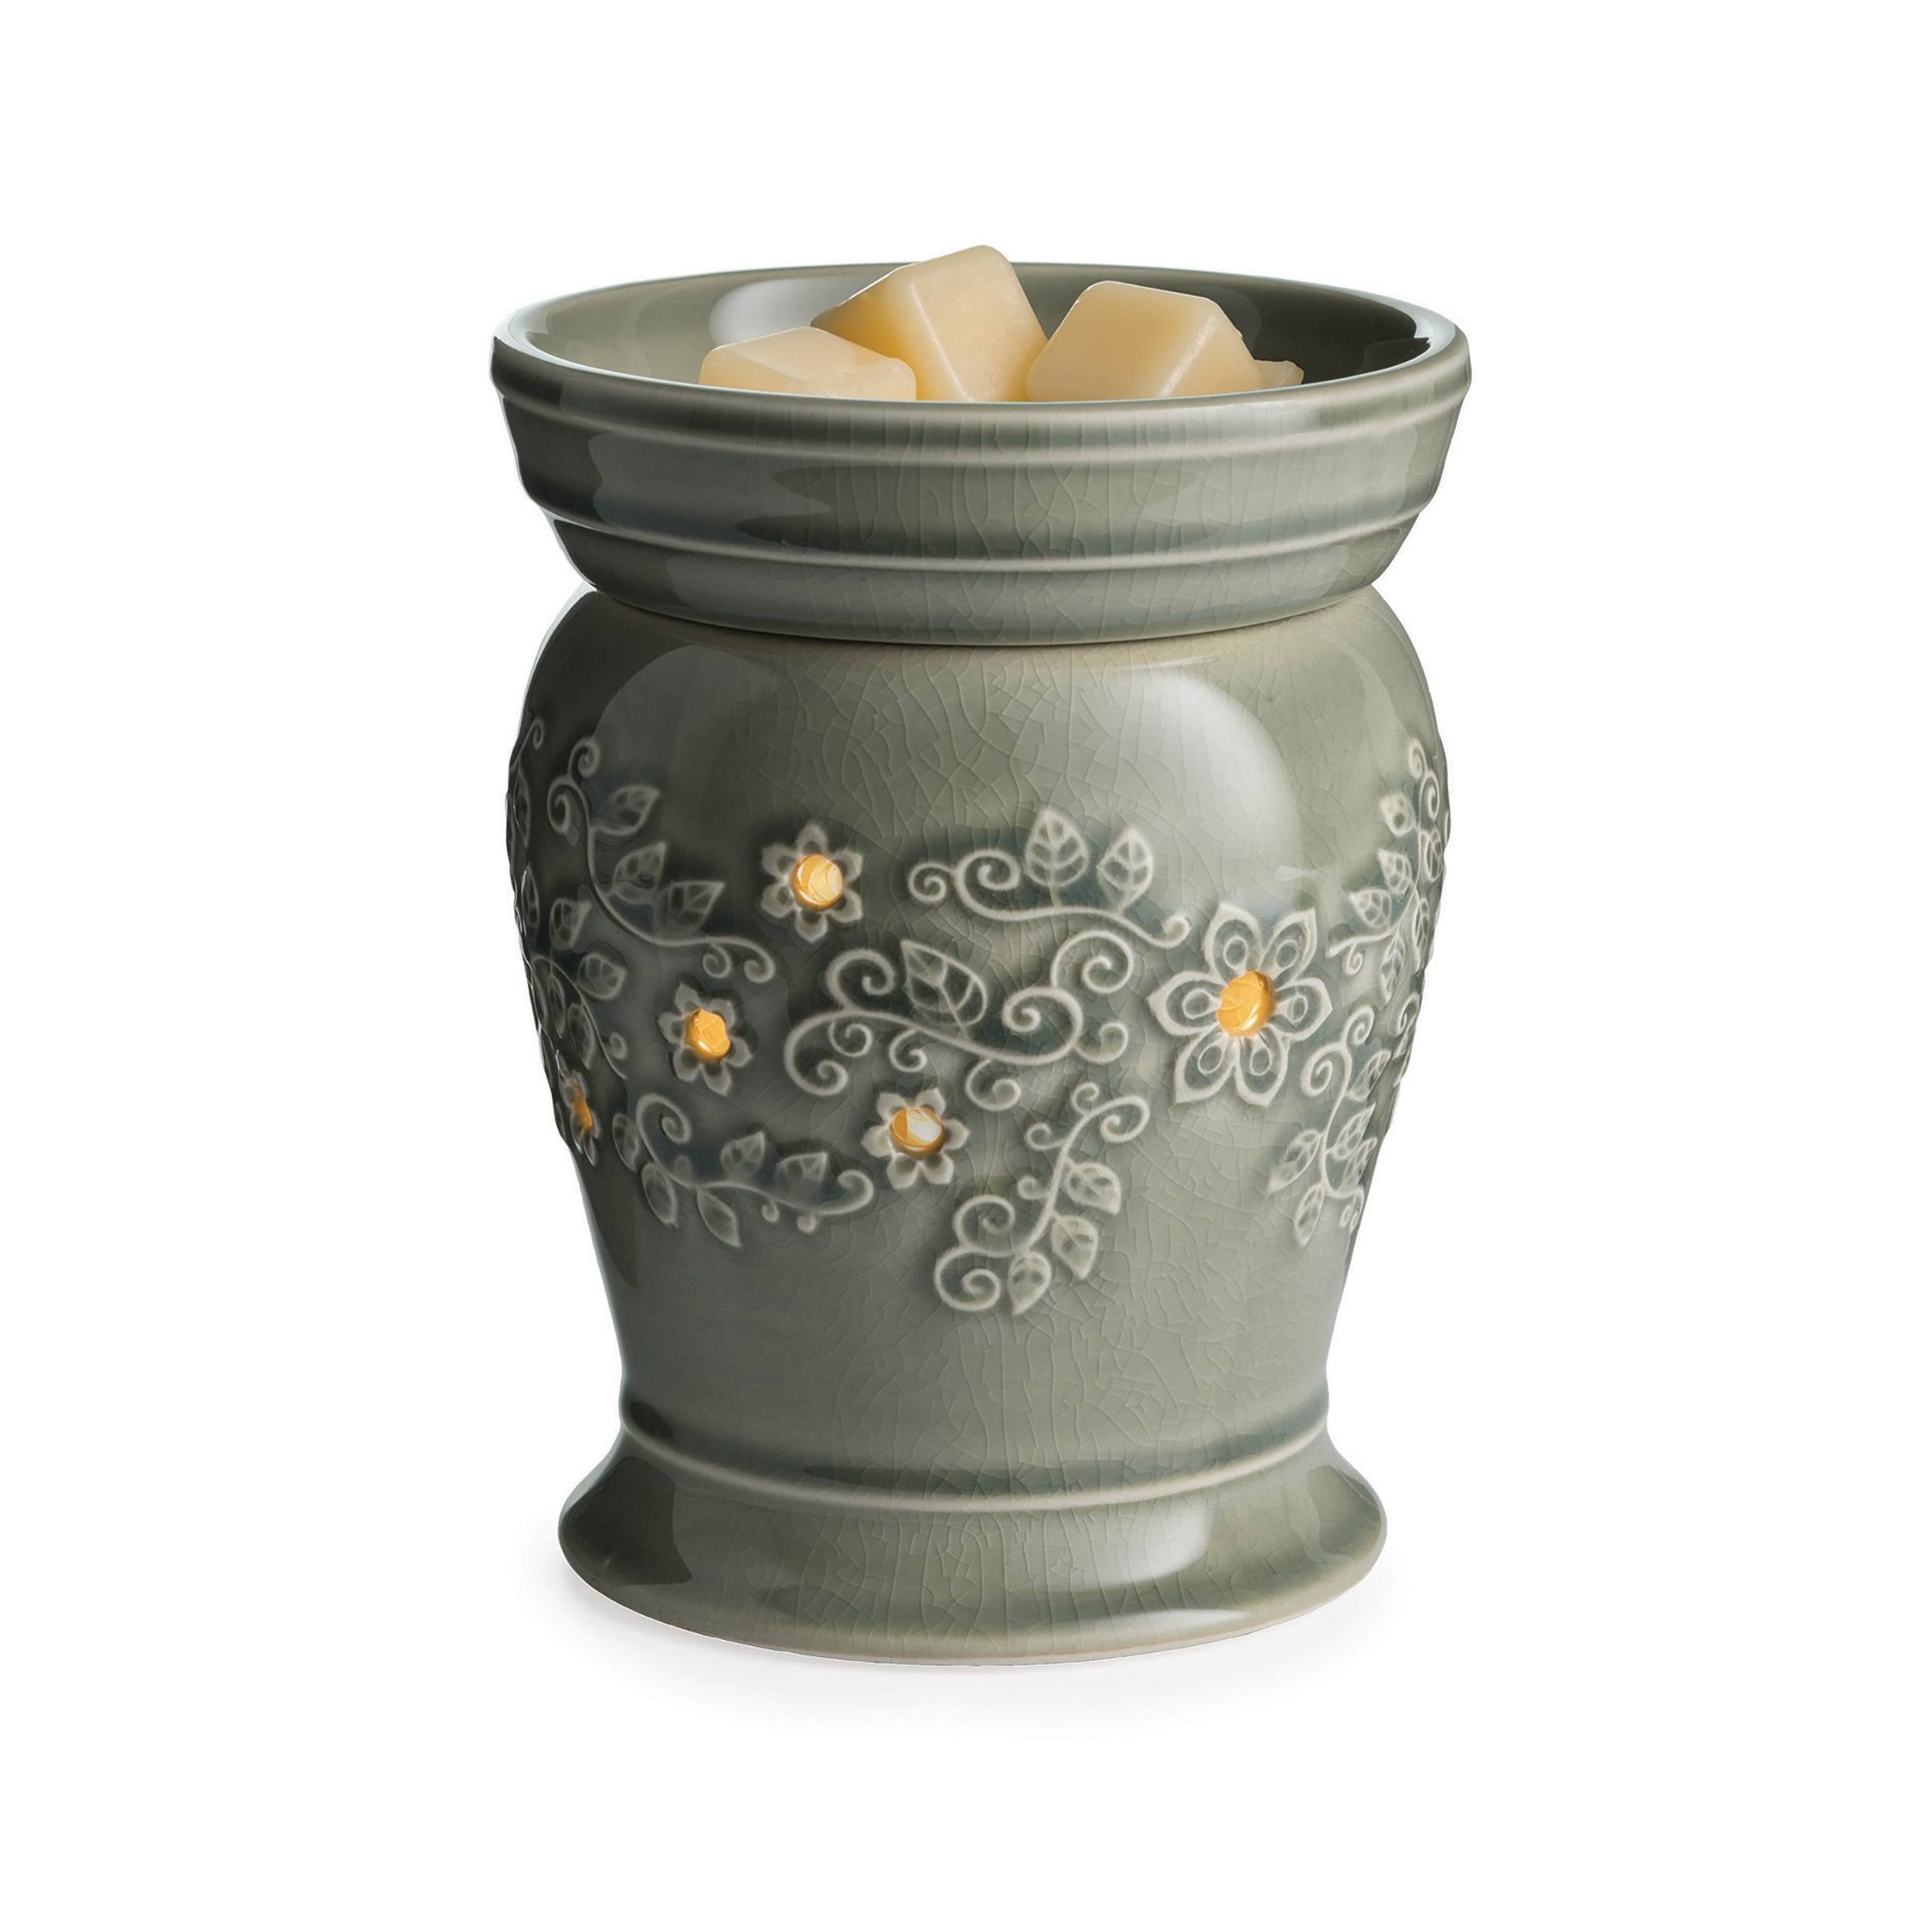 Candle Warmers Etc. Perennial Illumination Fragrance Warmer | Decor | Delivery Guaranteed | Free Shipping On All Orders | Best Price Guarantee